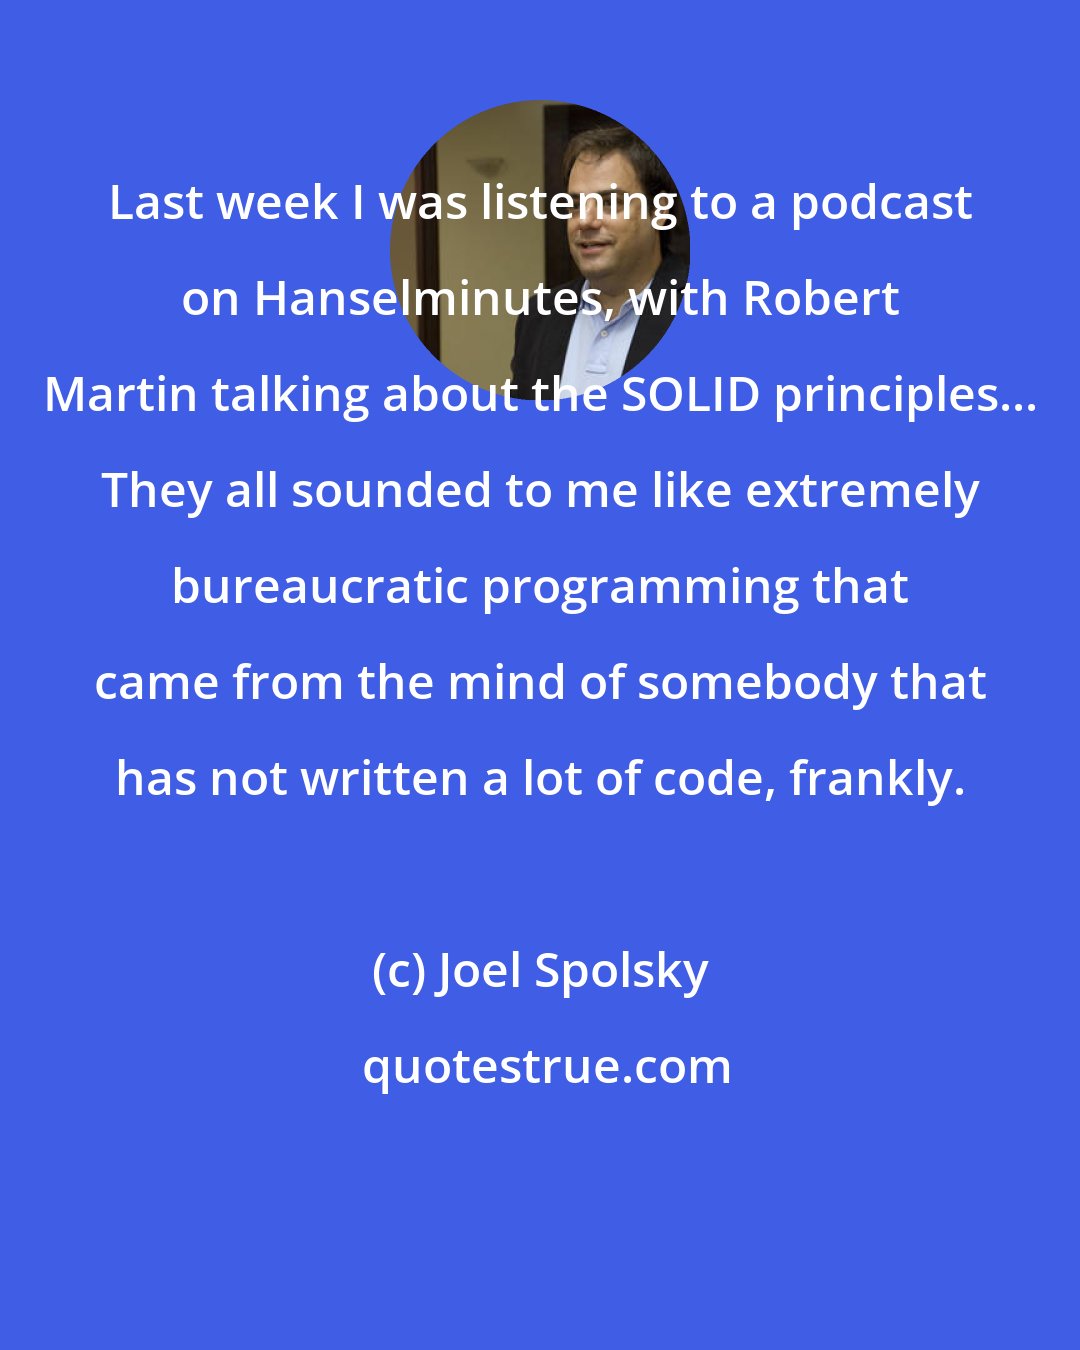 Joel Spolsky: Last week I was listening to a podcast on Hanselminutes, with Robert Martin talking about the SOLID principles... They all sounded to me like extremely bureaucratic programming that came from the mind of somebody that has not written a lot of code, frankly.